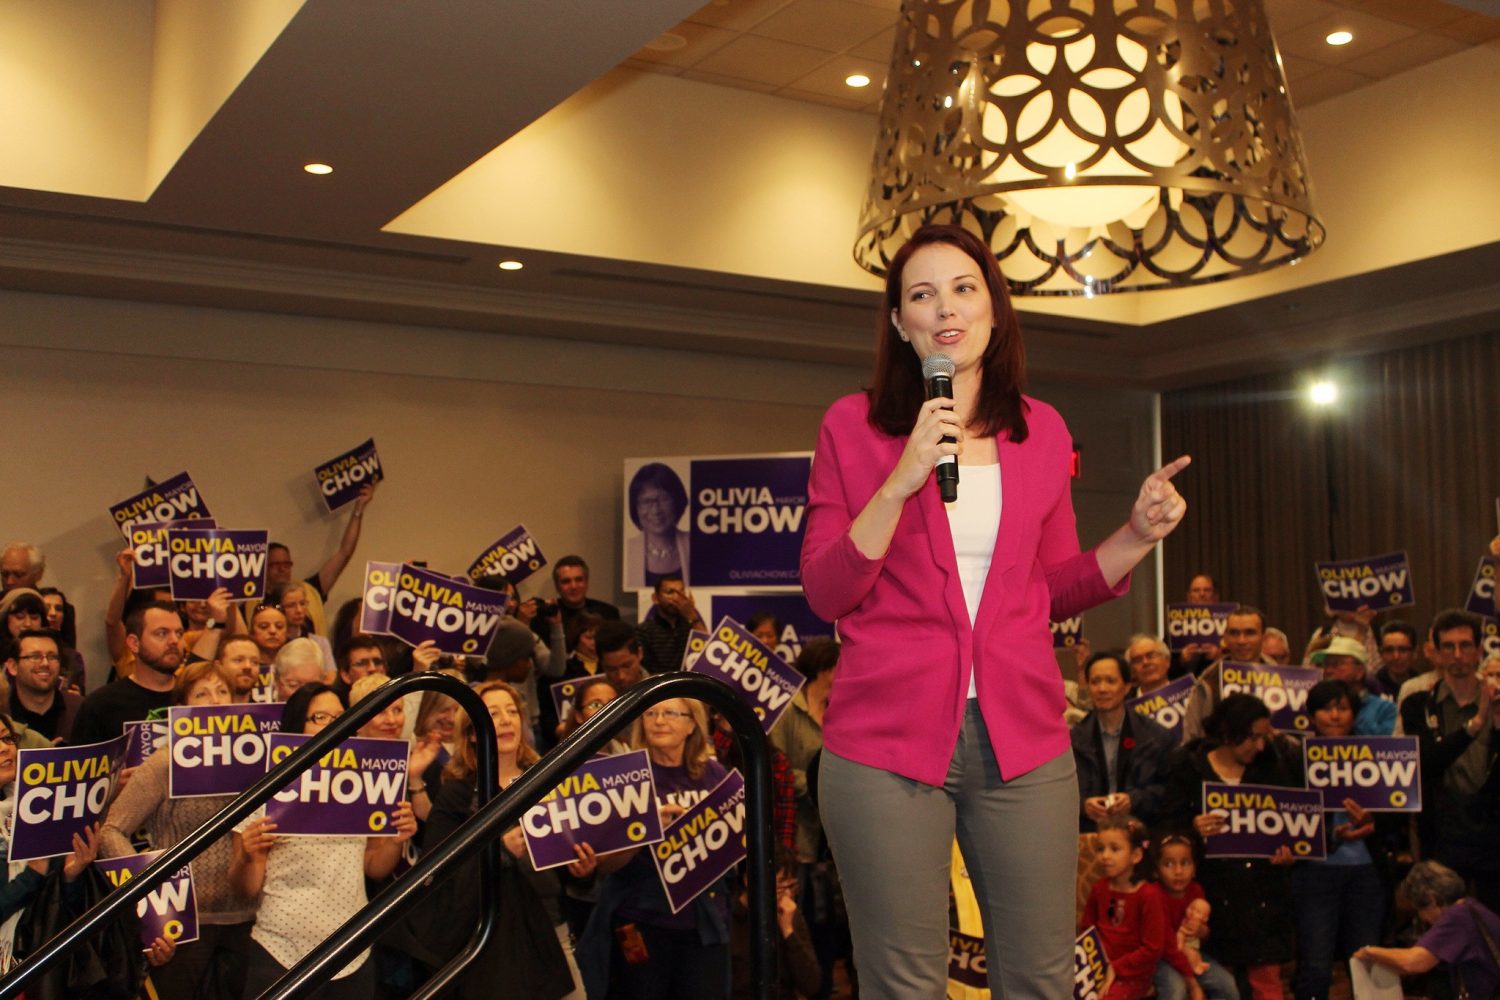 Jennifer Hollett, Olivia Chow's digital director during her 2014 mayoral campaign, speaks at a rally. Hollett is the new head of news and government at Twitter Canada. Photo courtesy Olivia Chow campaign/CC BY 2.0.